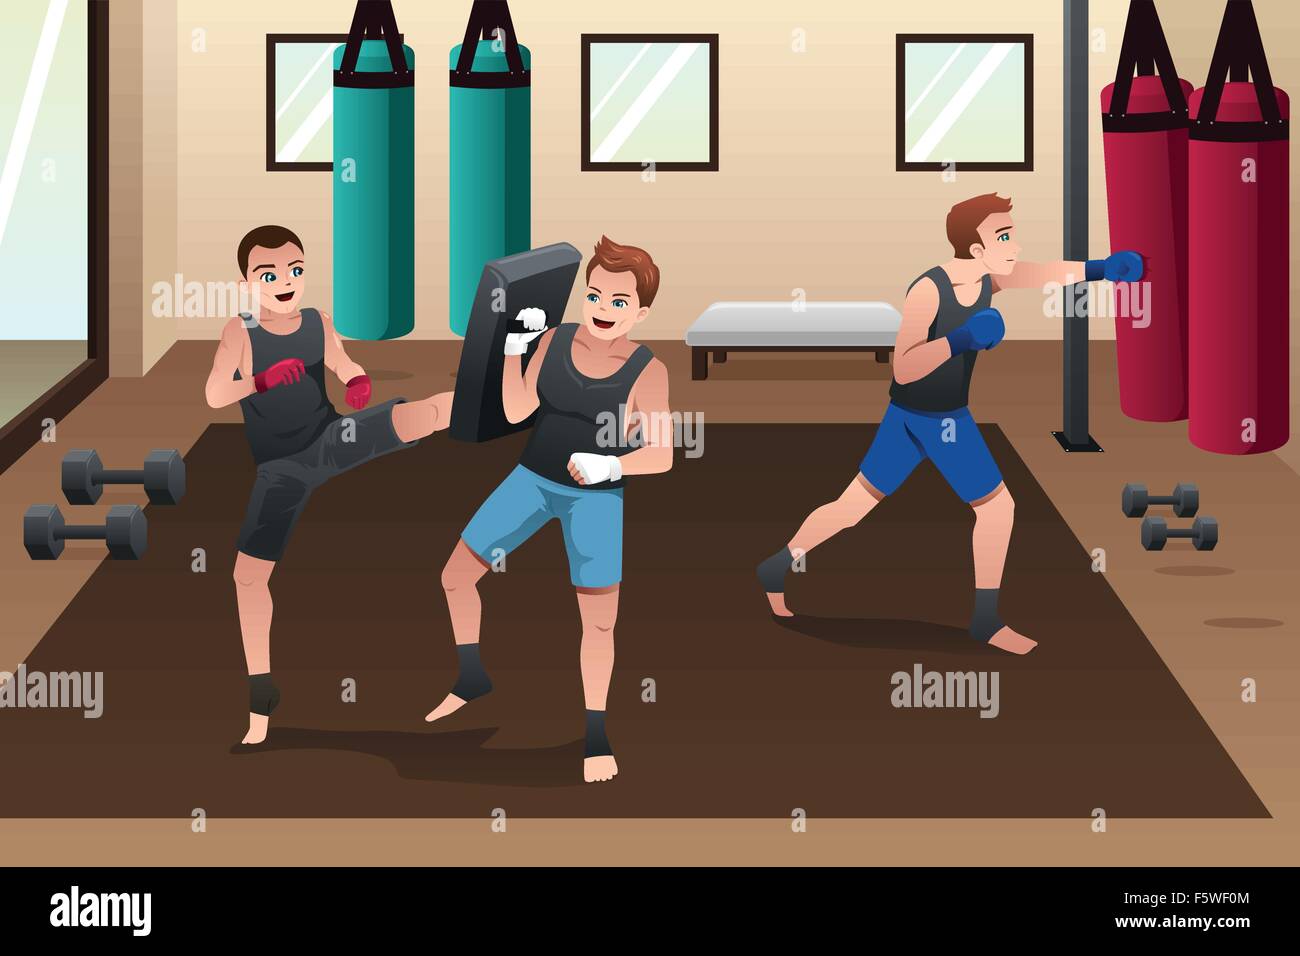 A vector illustration of boxer training in the gym Stock Vector